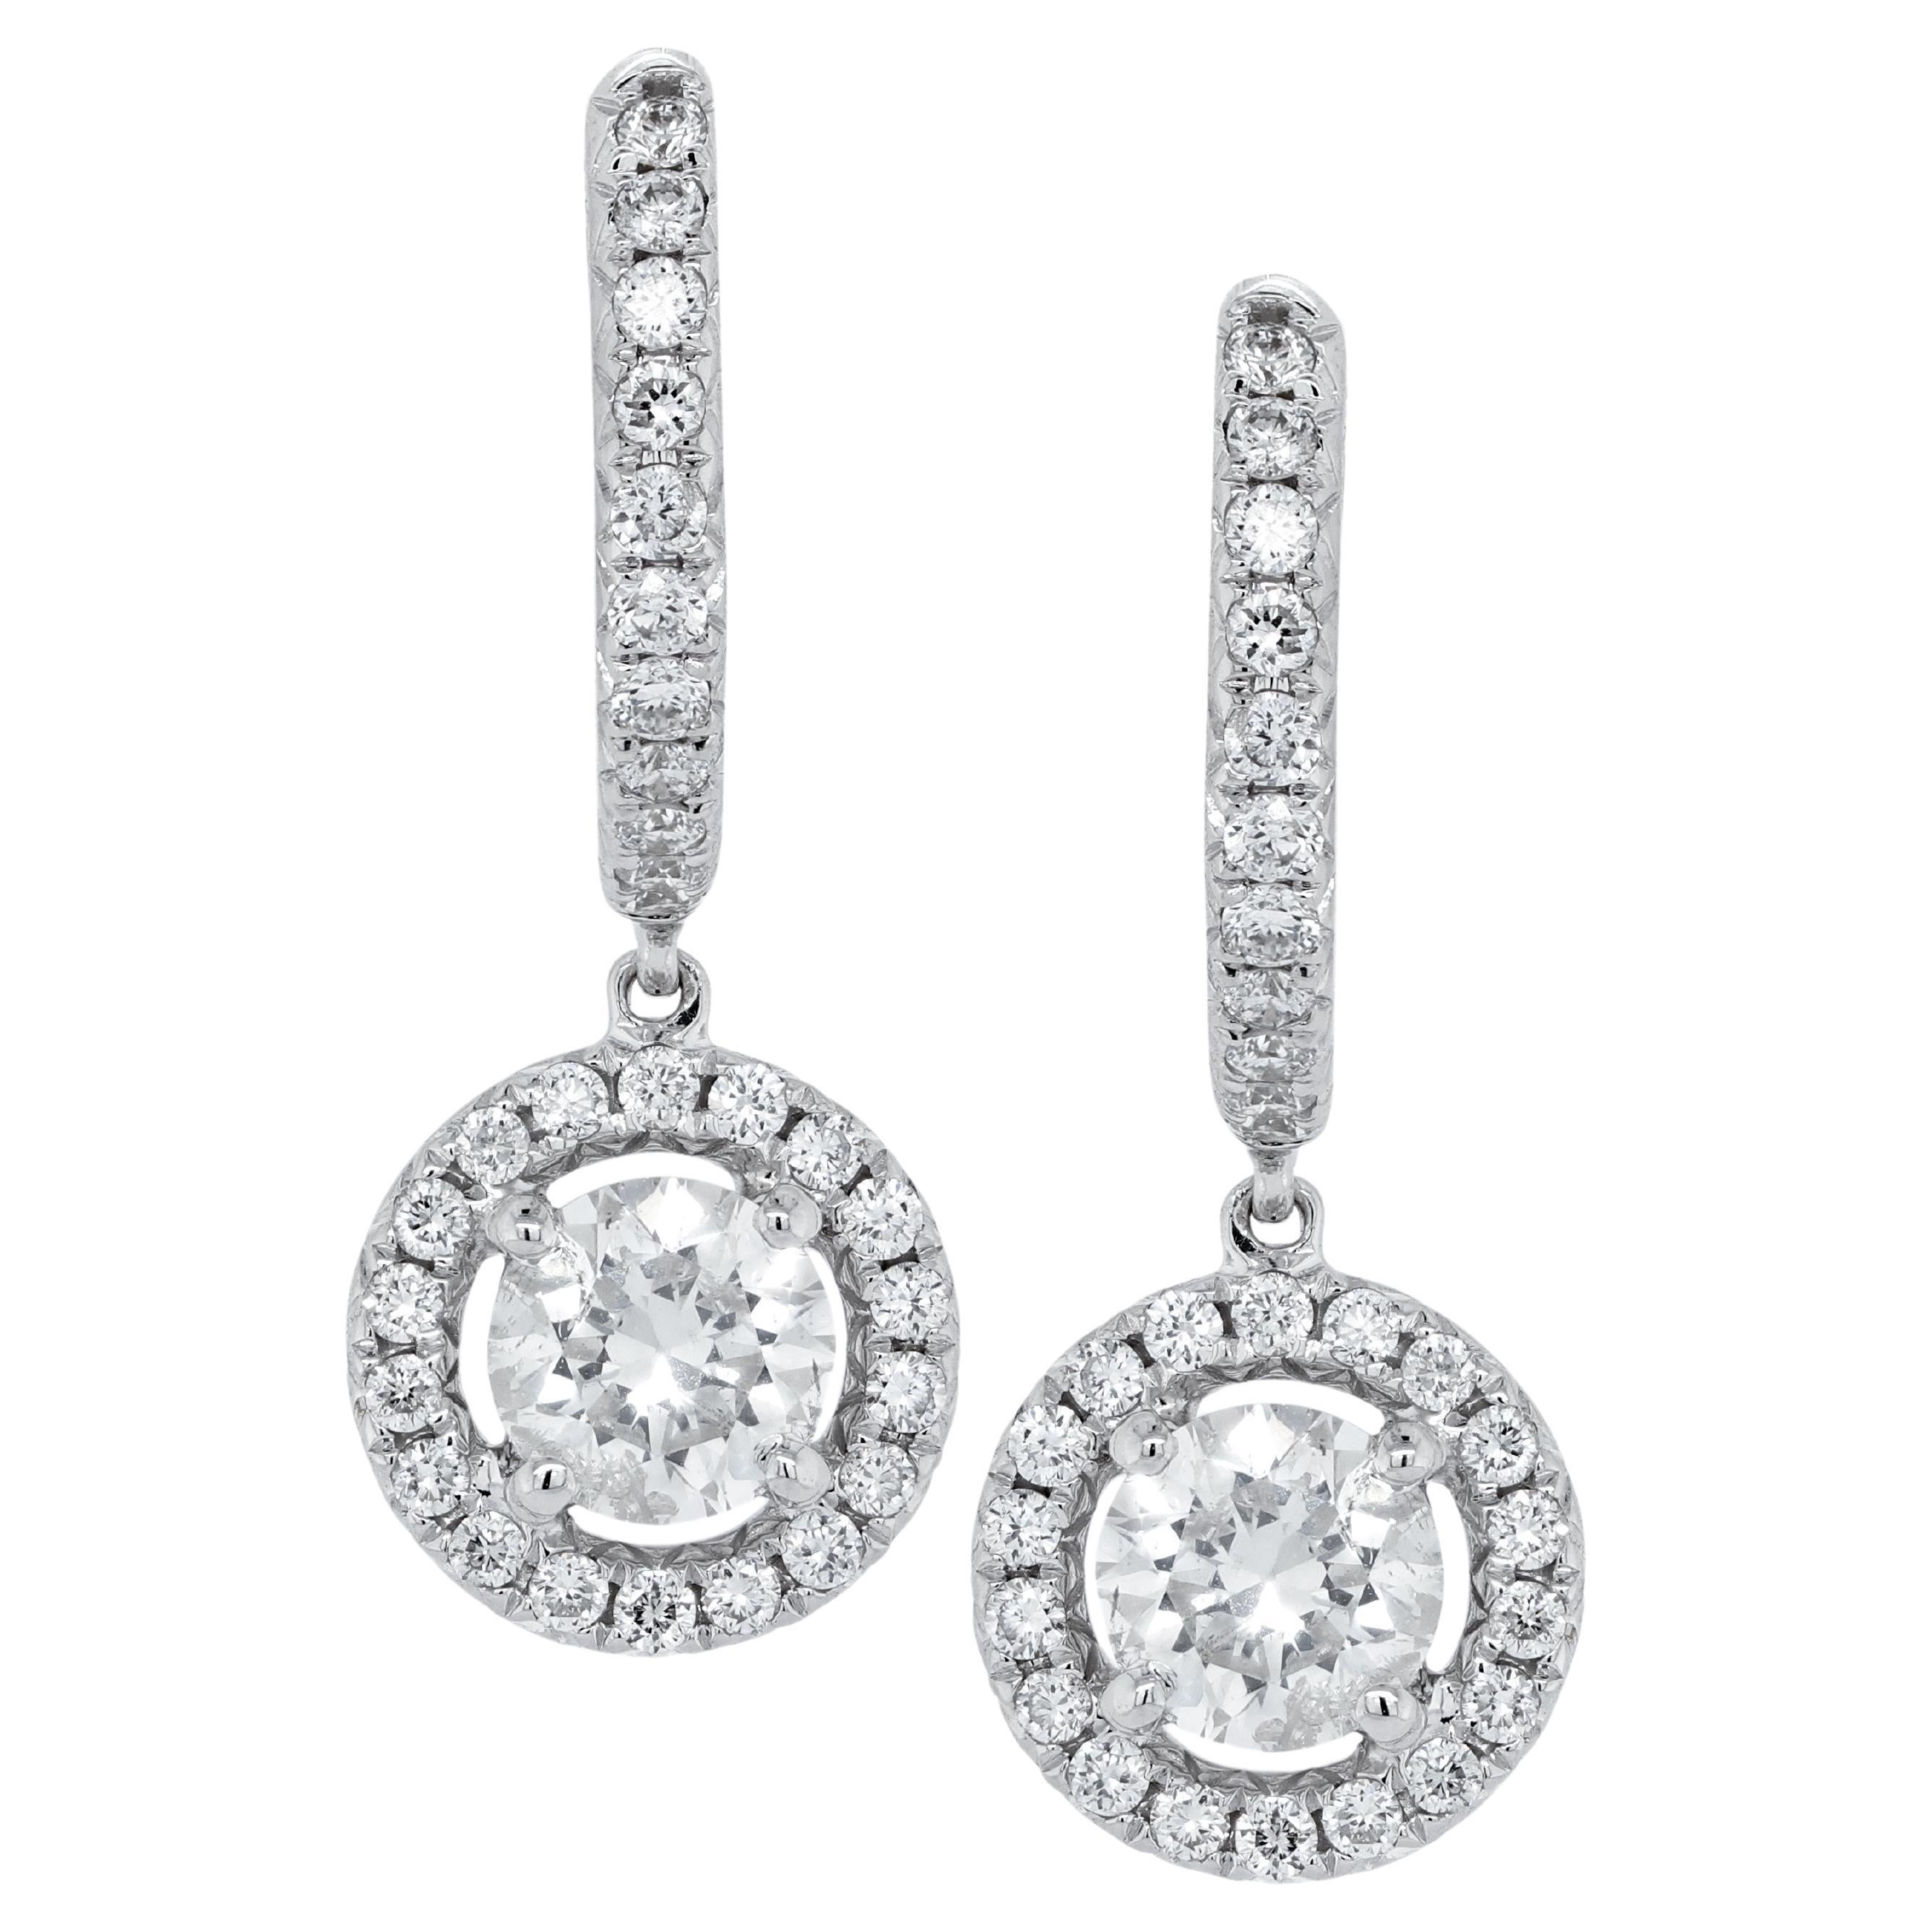 Diana M. 14kt white gold hanging earrings featuring 1.20 cts tw of round diamond For Sale